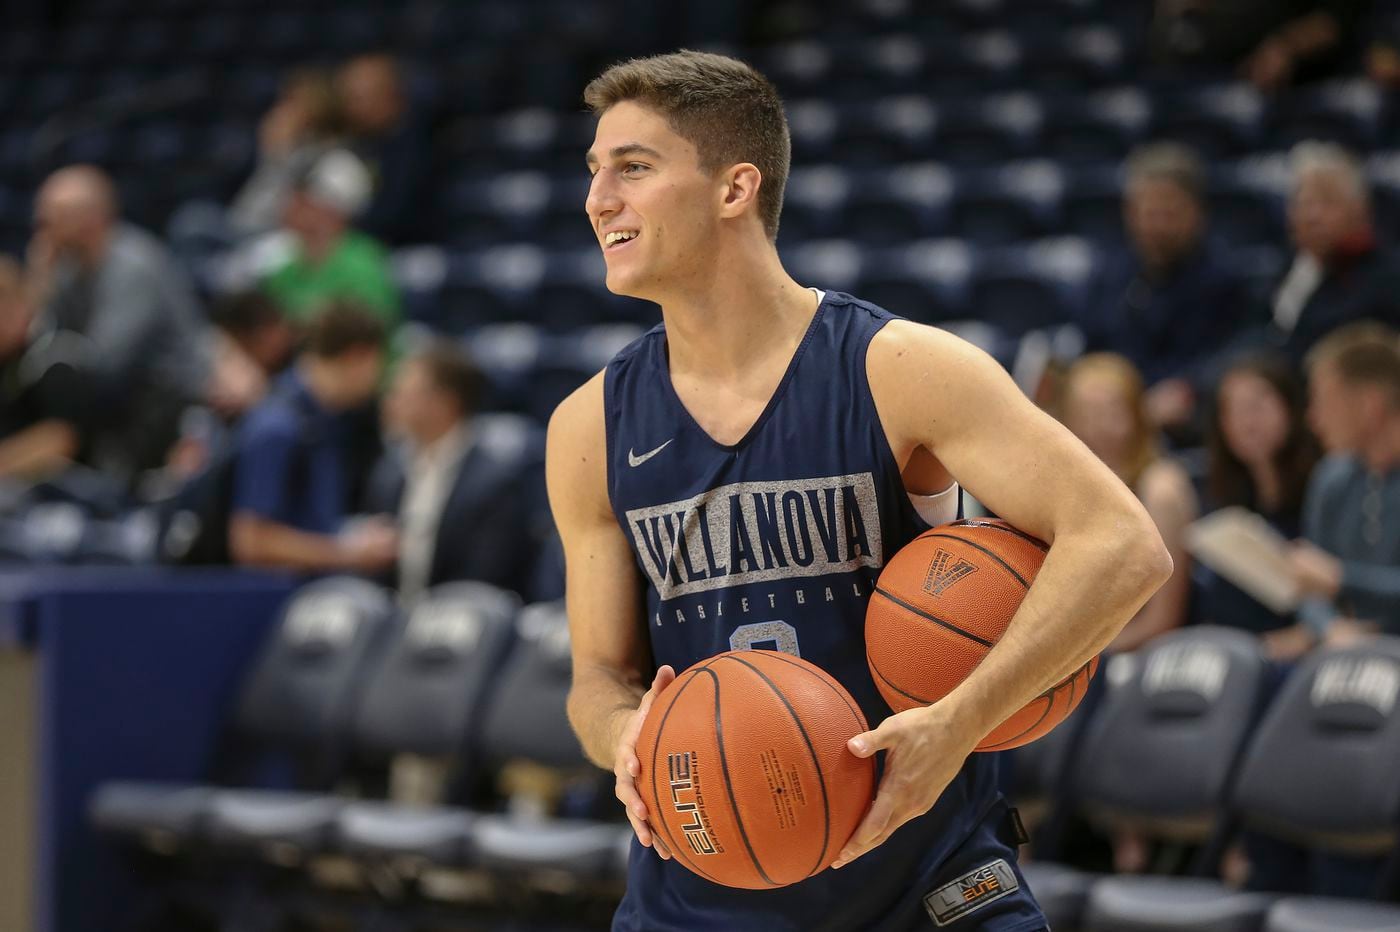 Injuries are affecting Collin Gillespie’s prep for start of Villanova’s